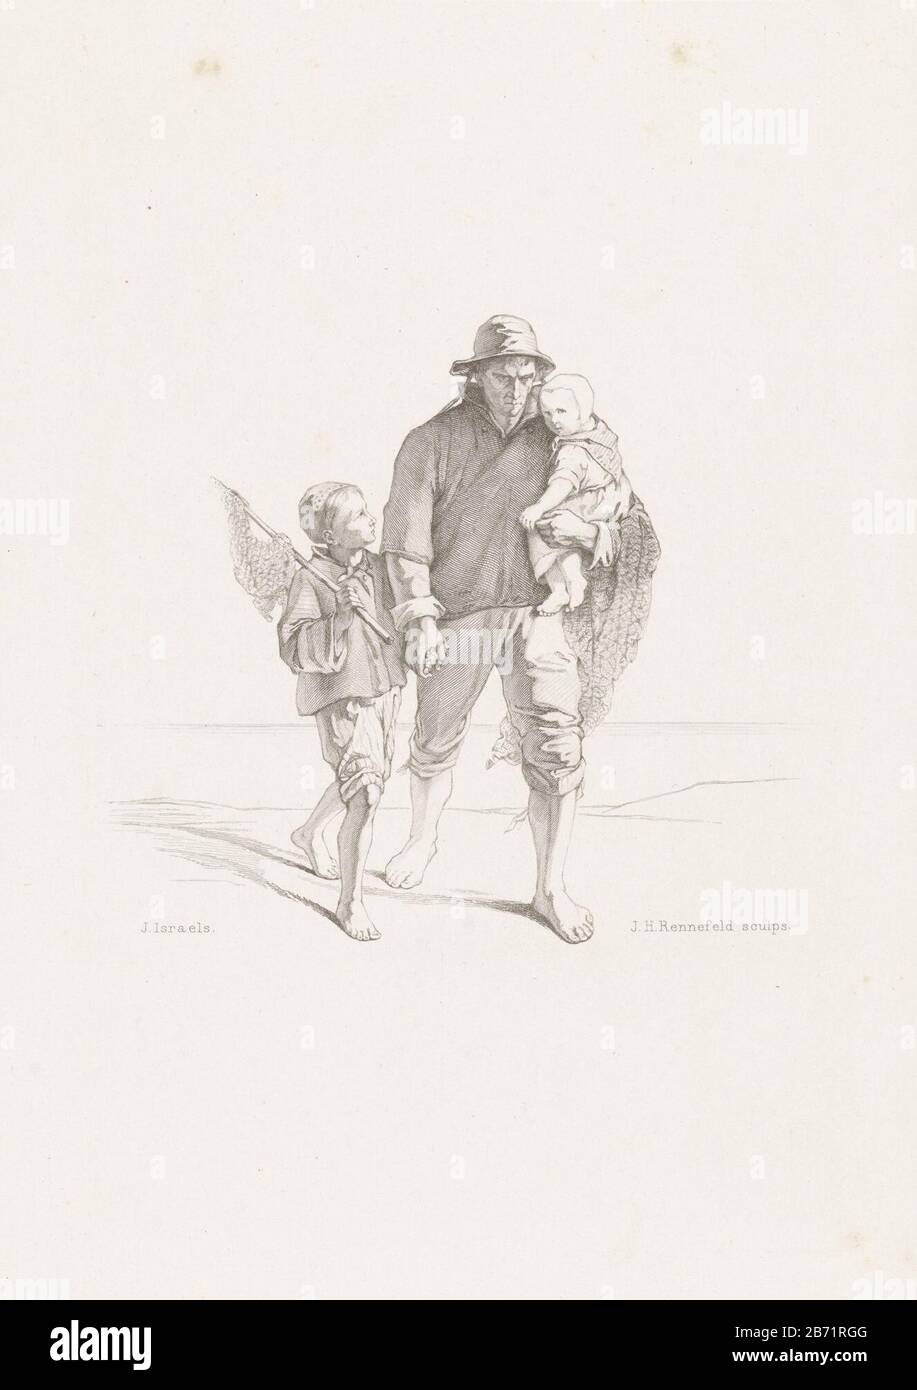 Langs moeders graf De kinderen der zee (serietitel) A fisherman with his children past the grave of the deceased mother. The picture is of series of prints "The